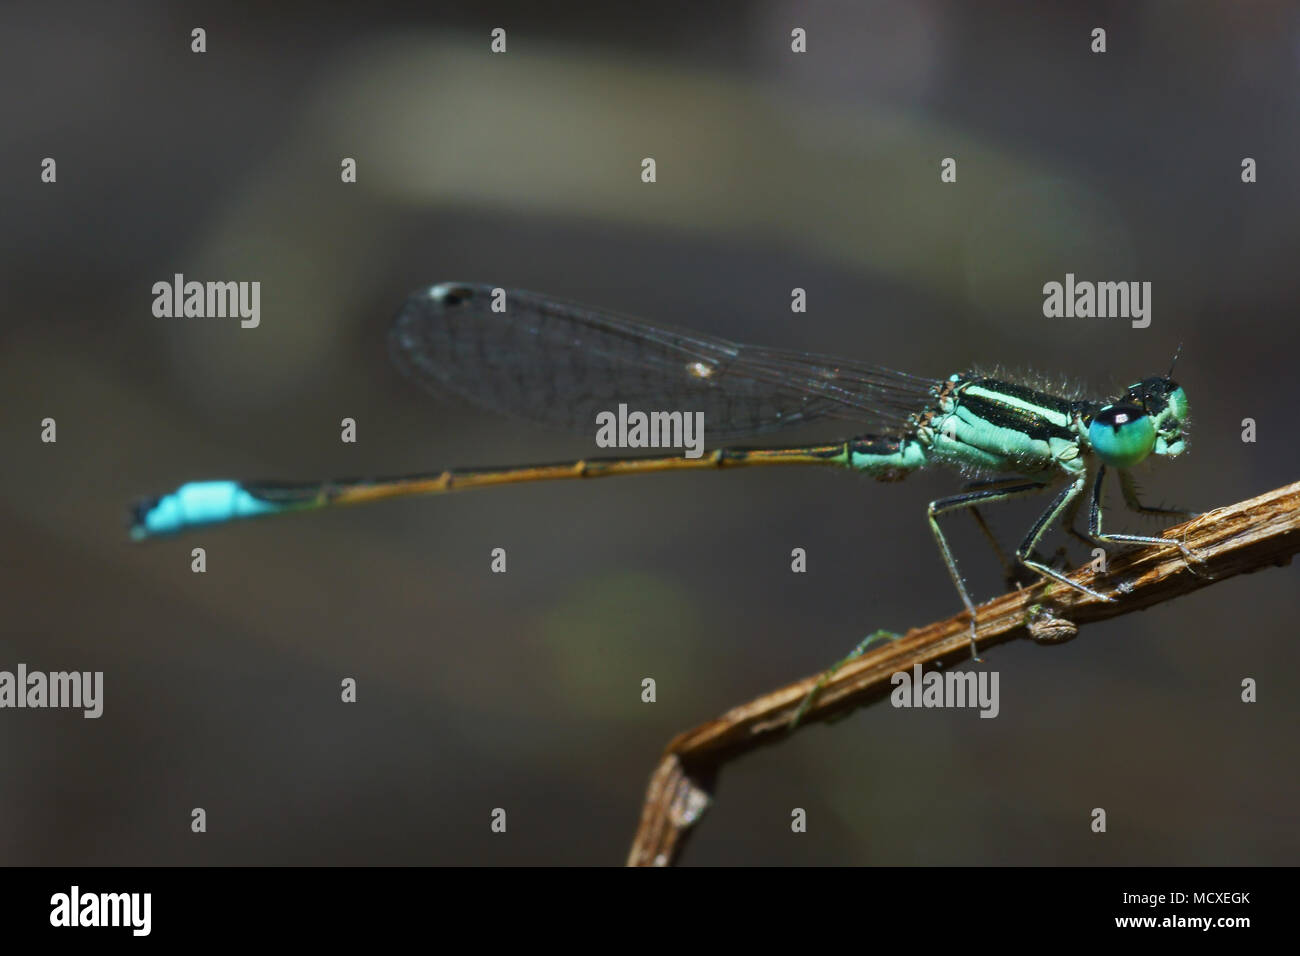 Lateral view of a damselfly in Spain. Stock Photo